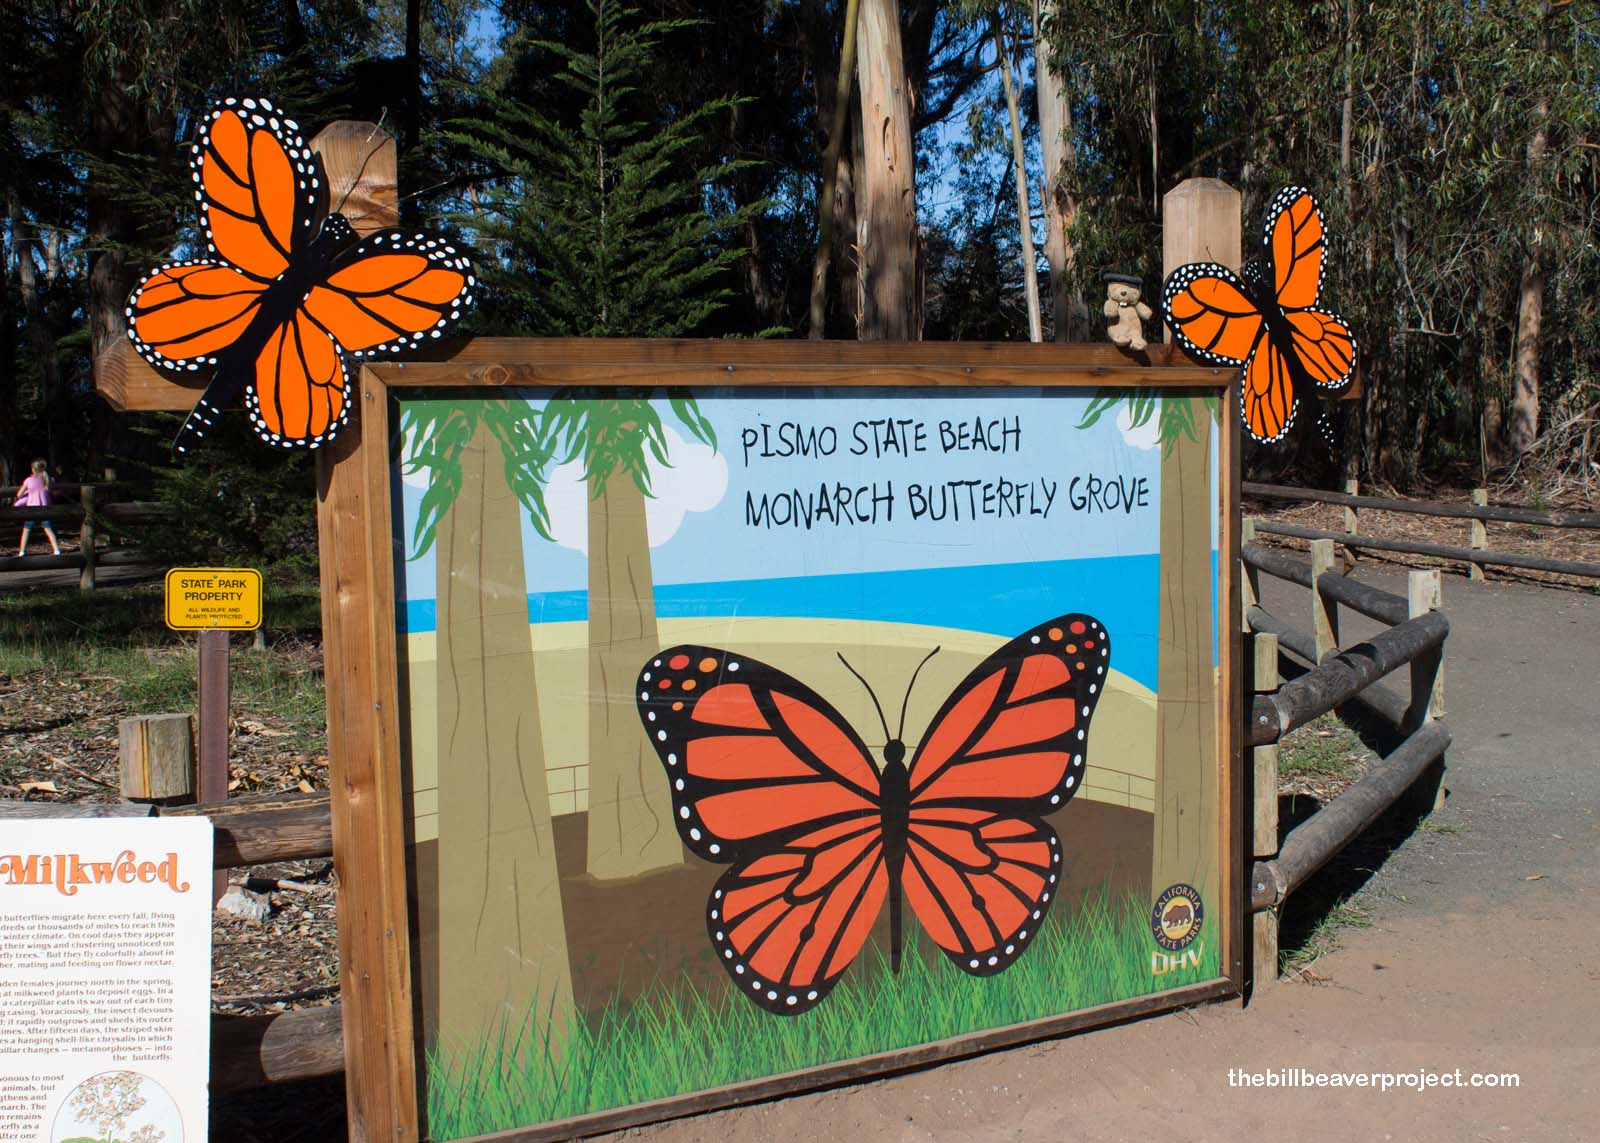 The Pismo Beach Monarch Butterfly Grove